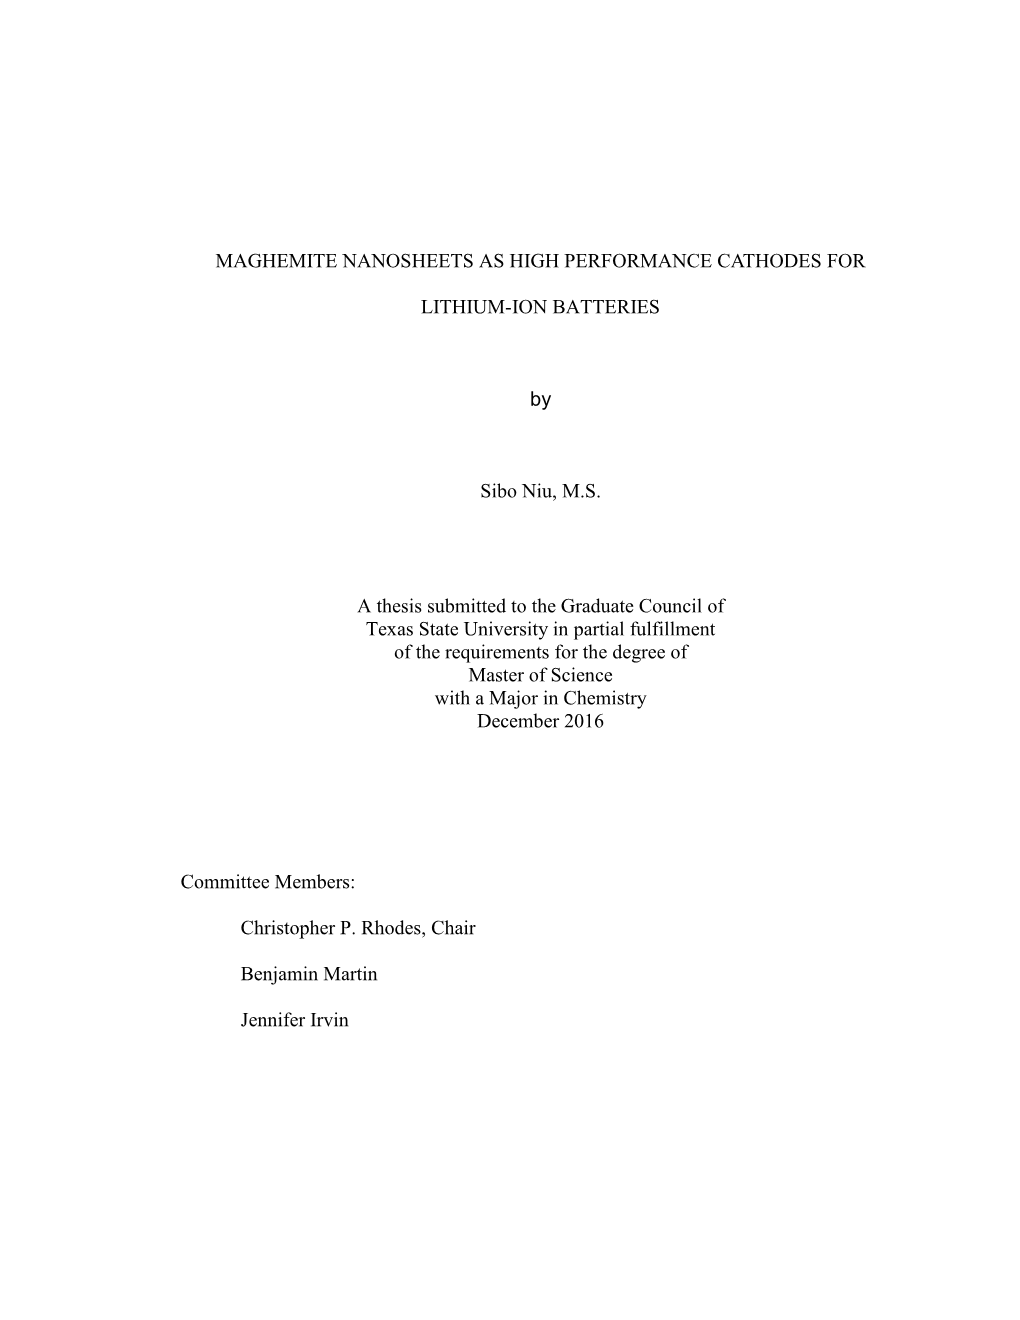 MAGHEMITE NANOSHEETS AS HIGH PERFORMANCE CATHODES for LITHIUM-ION BATTERIES by Sibo Niu, M.S. a Thesis Submitted to the Graduate